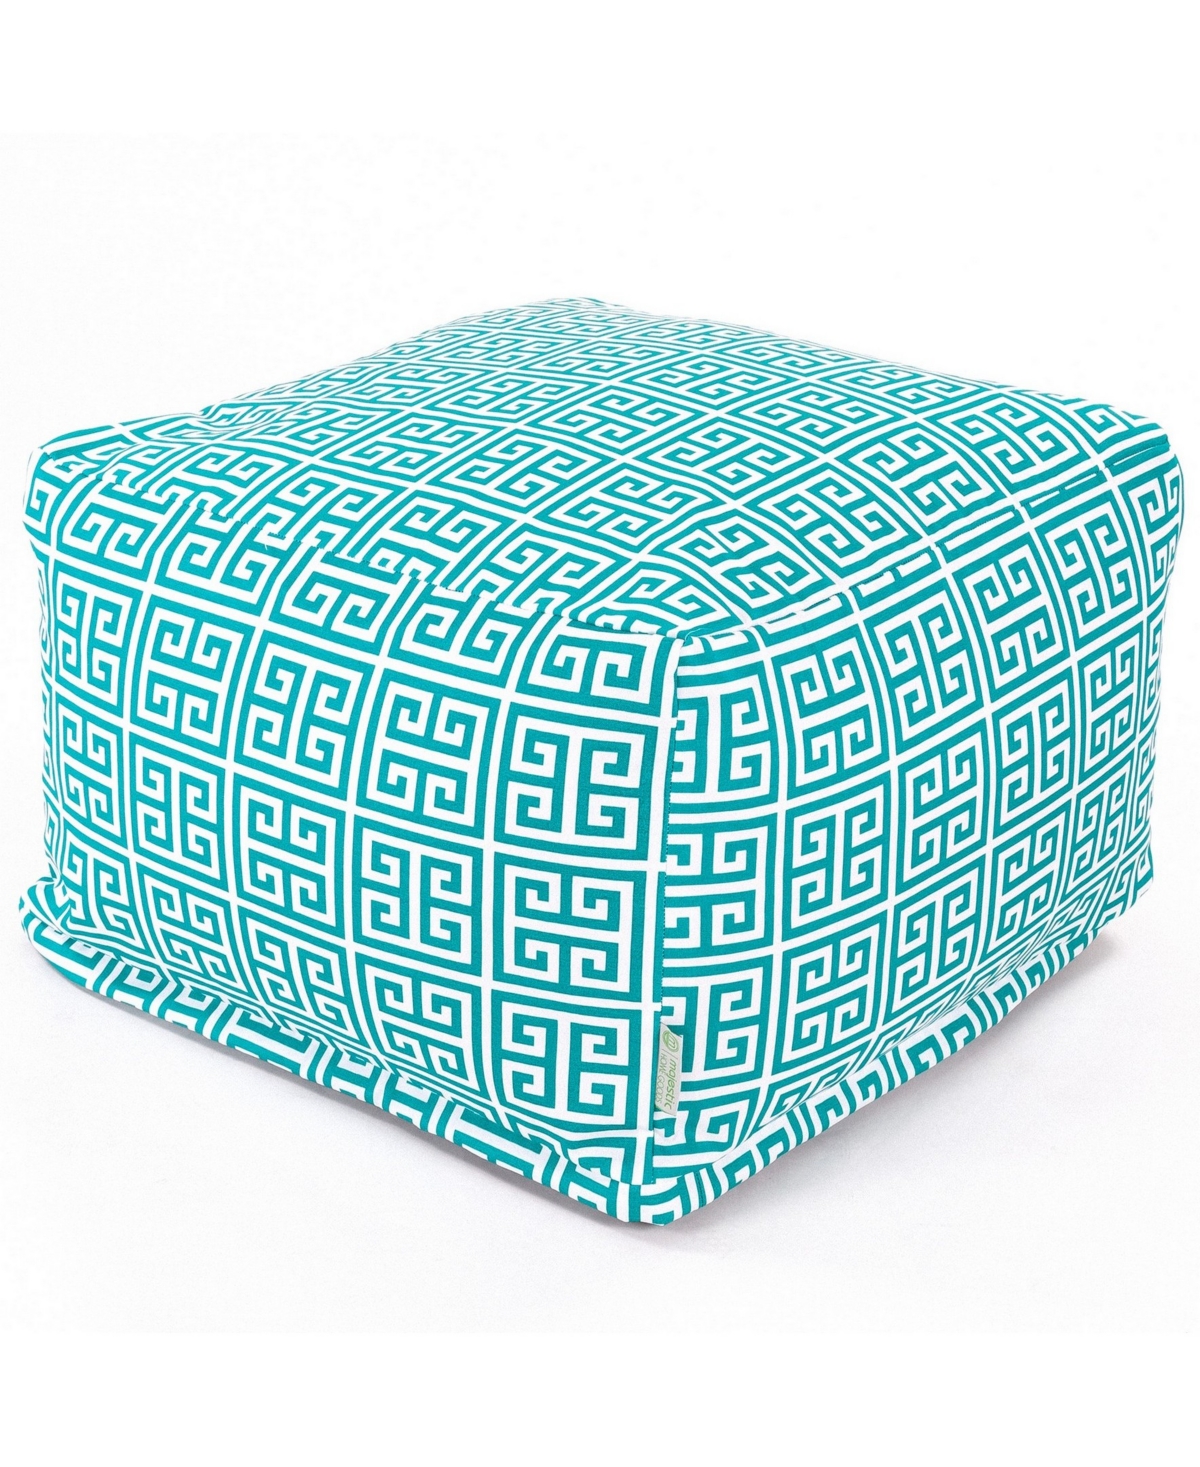 UPC 859072202818 product image for Majestic Home Goods Towers Ottoman Square Pouf 27